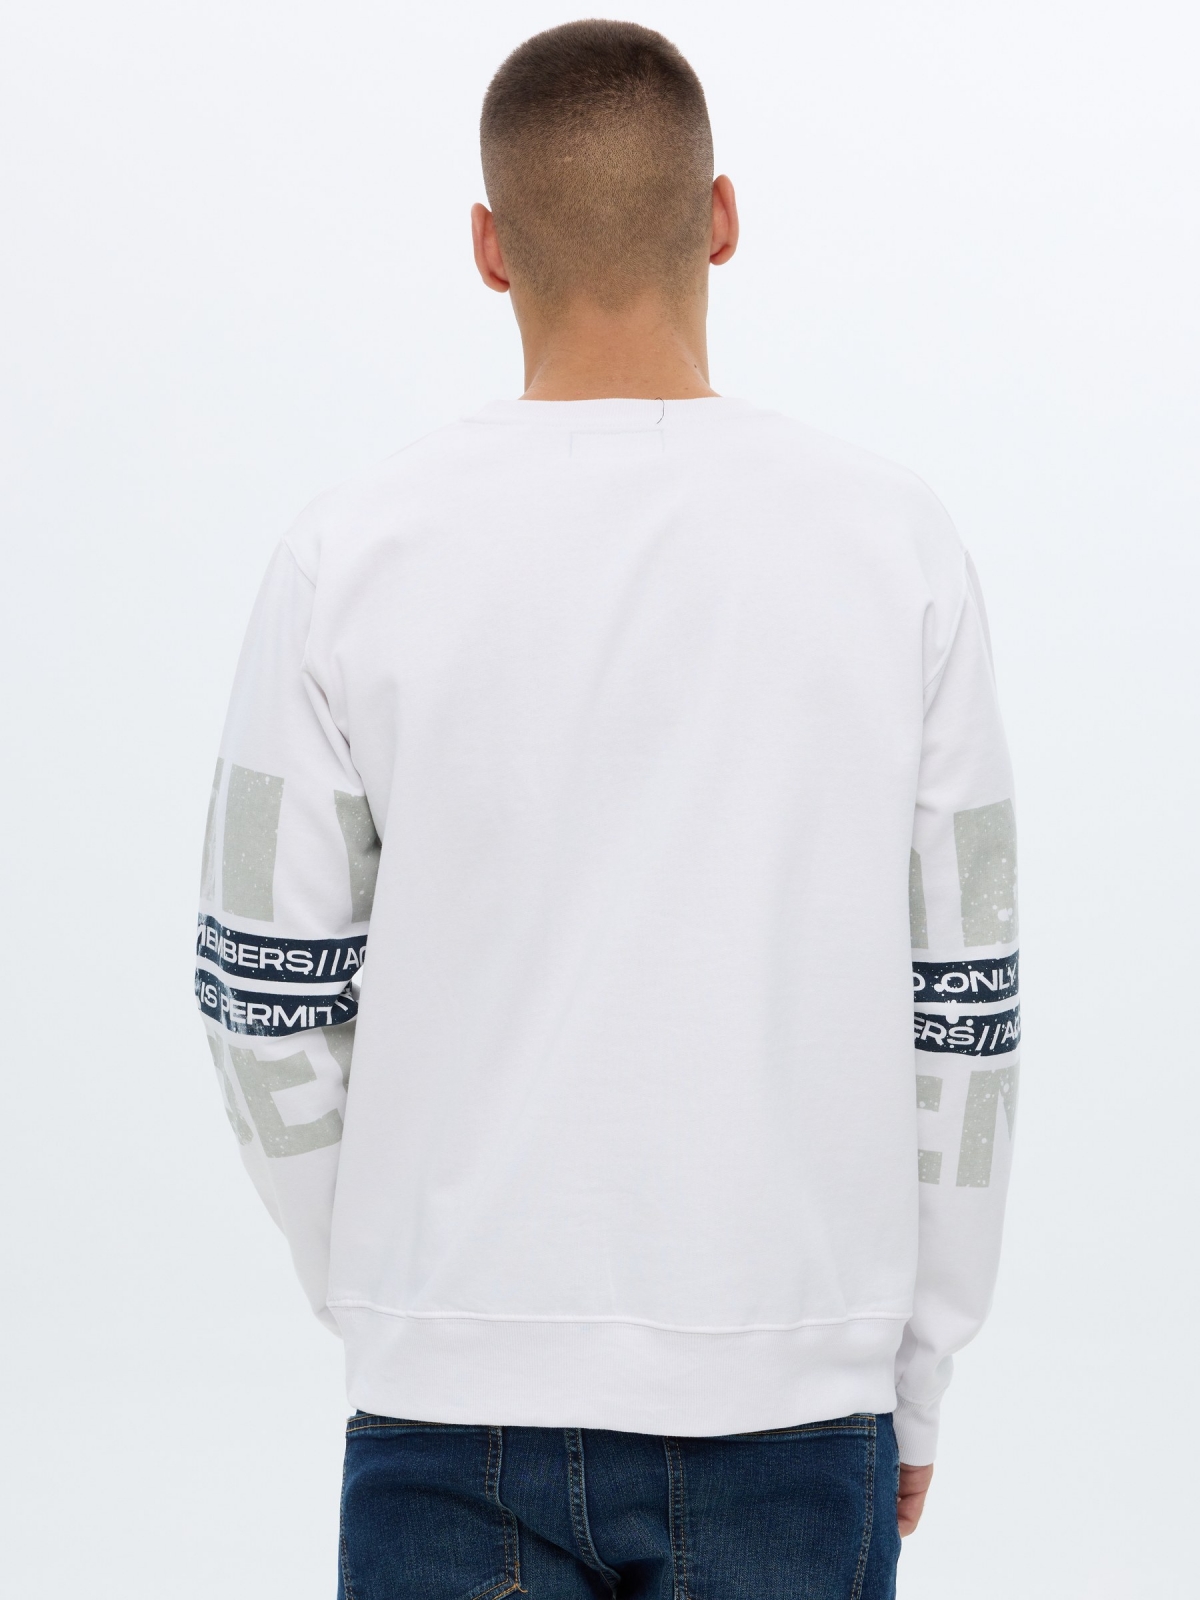 White sweatshirt printed letters white middle back view